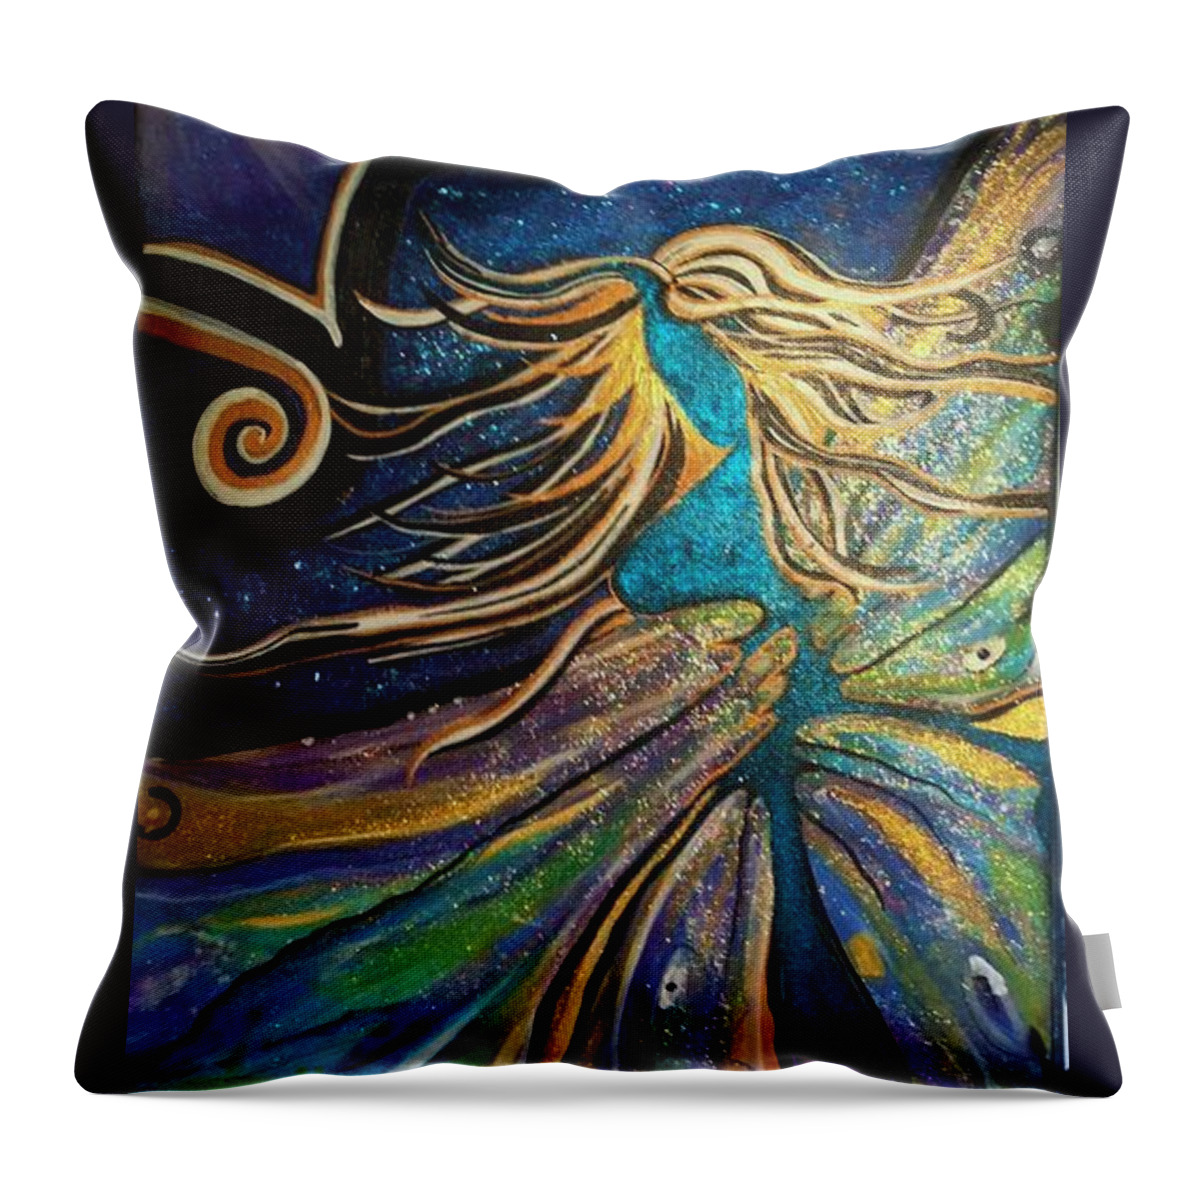 Divinity Throw Pillow featuring the painting Portal Of The Divine by Tracy Mcdurmon